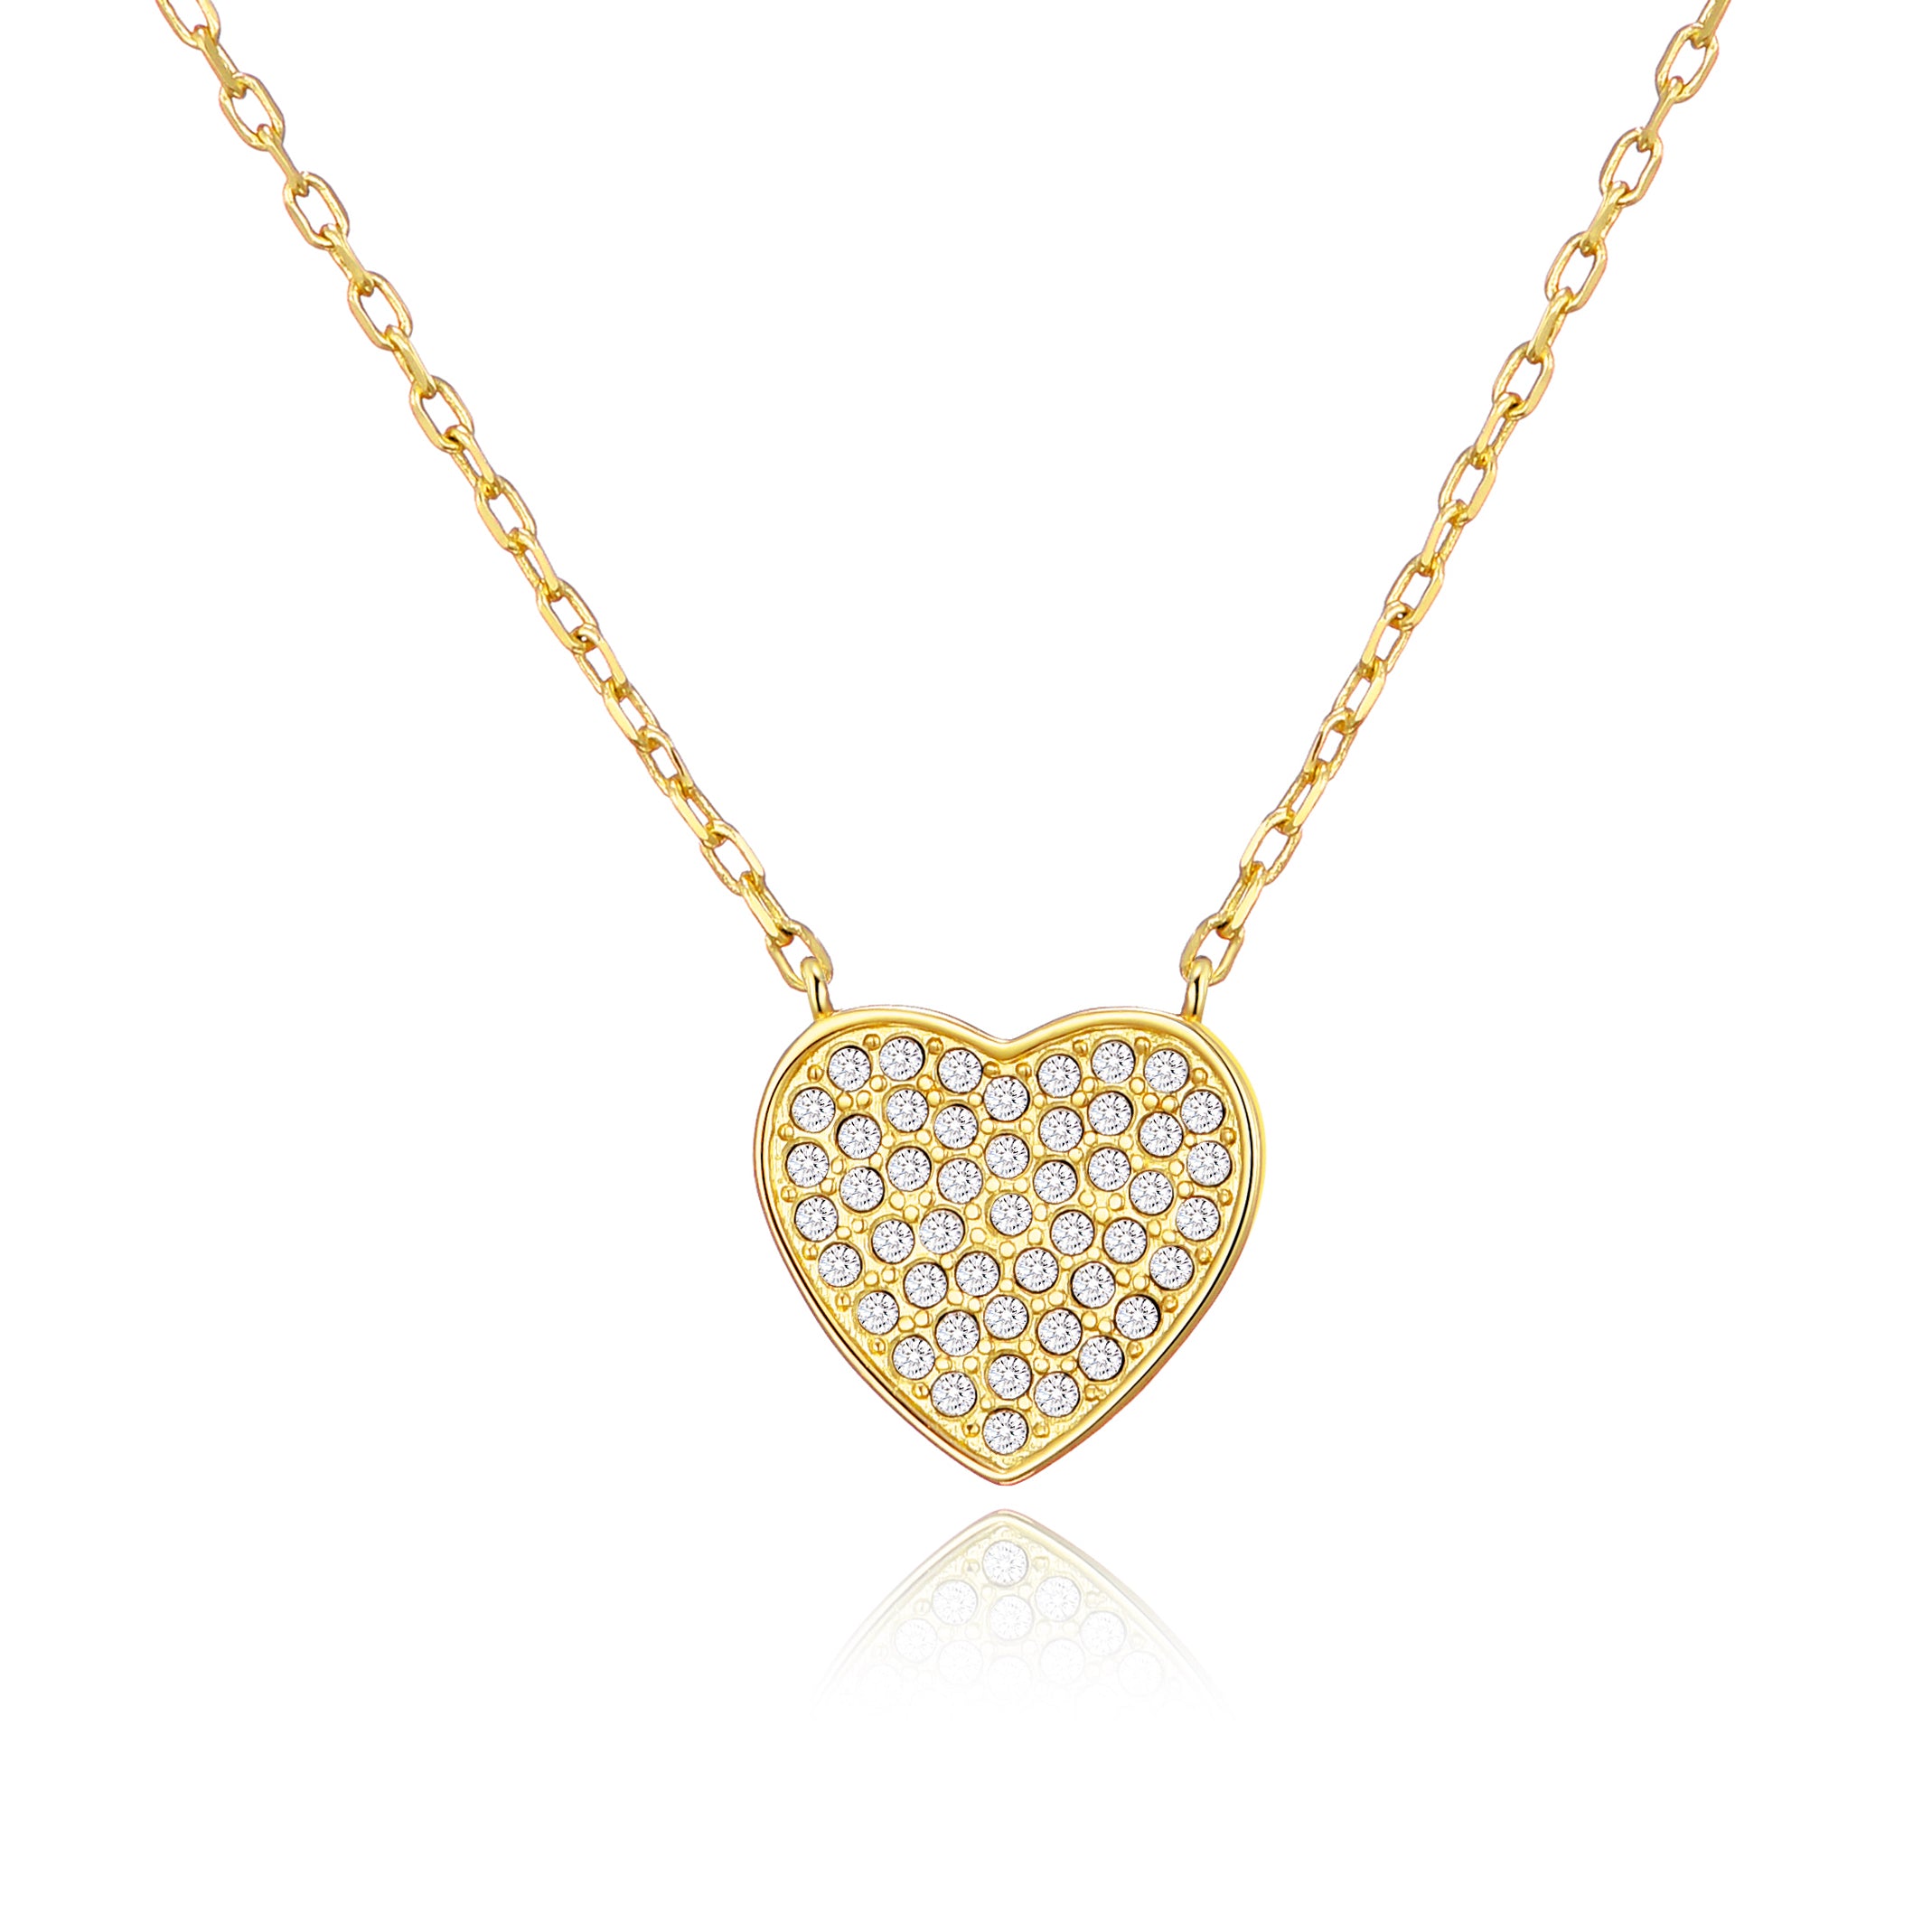 Gold Plated Pave Heart Necklace Created with Zircondia® Crystals by Philip Jones Jewellery